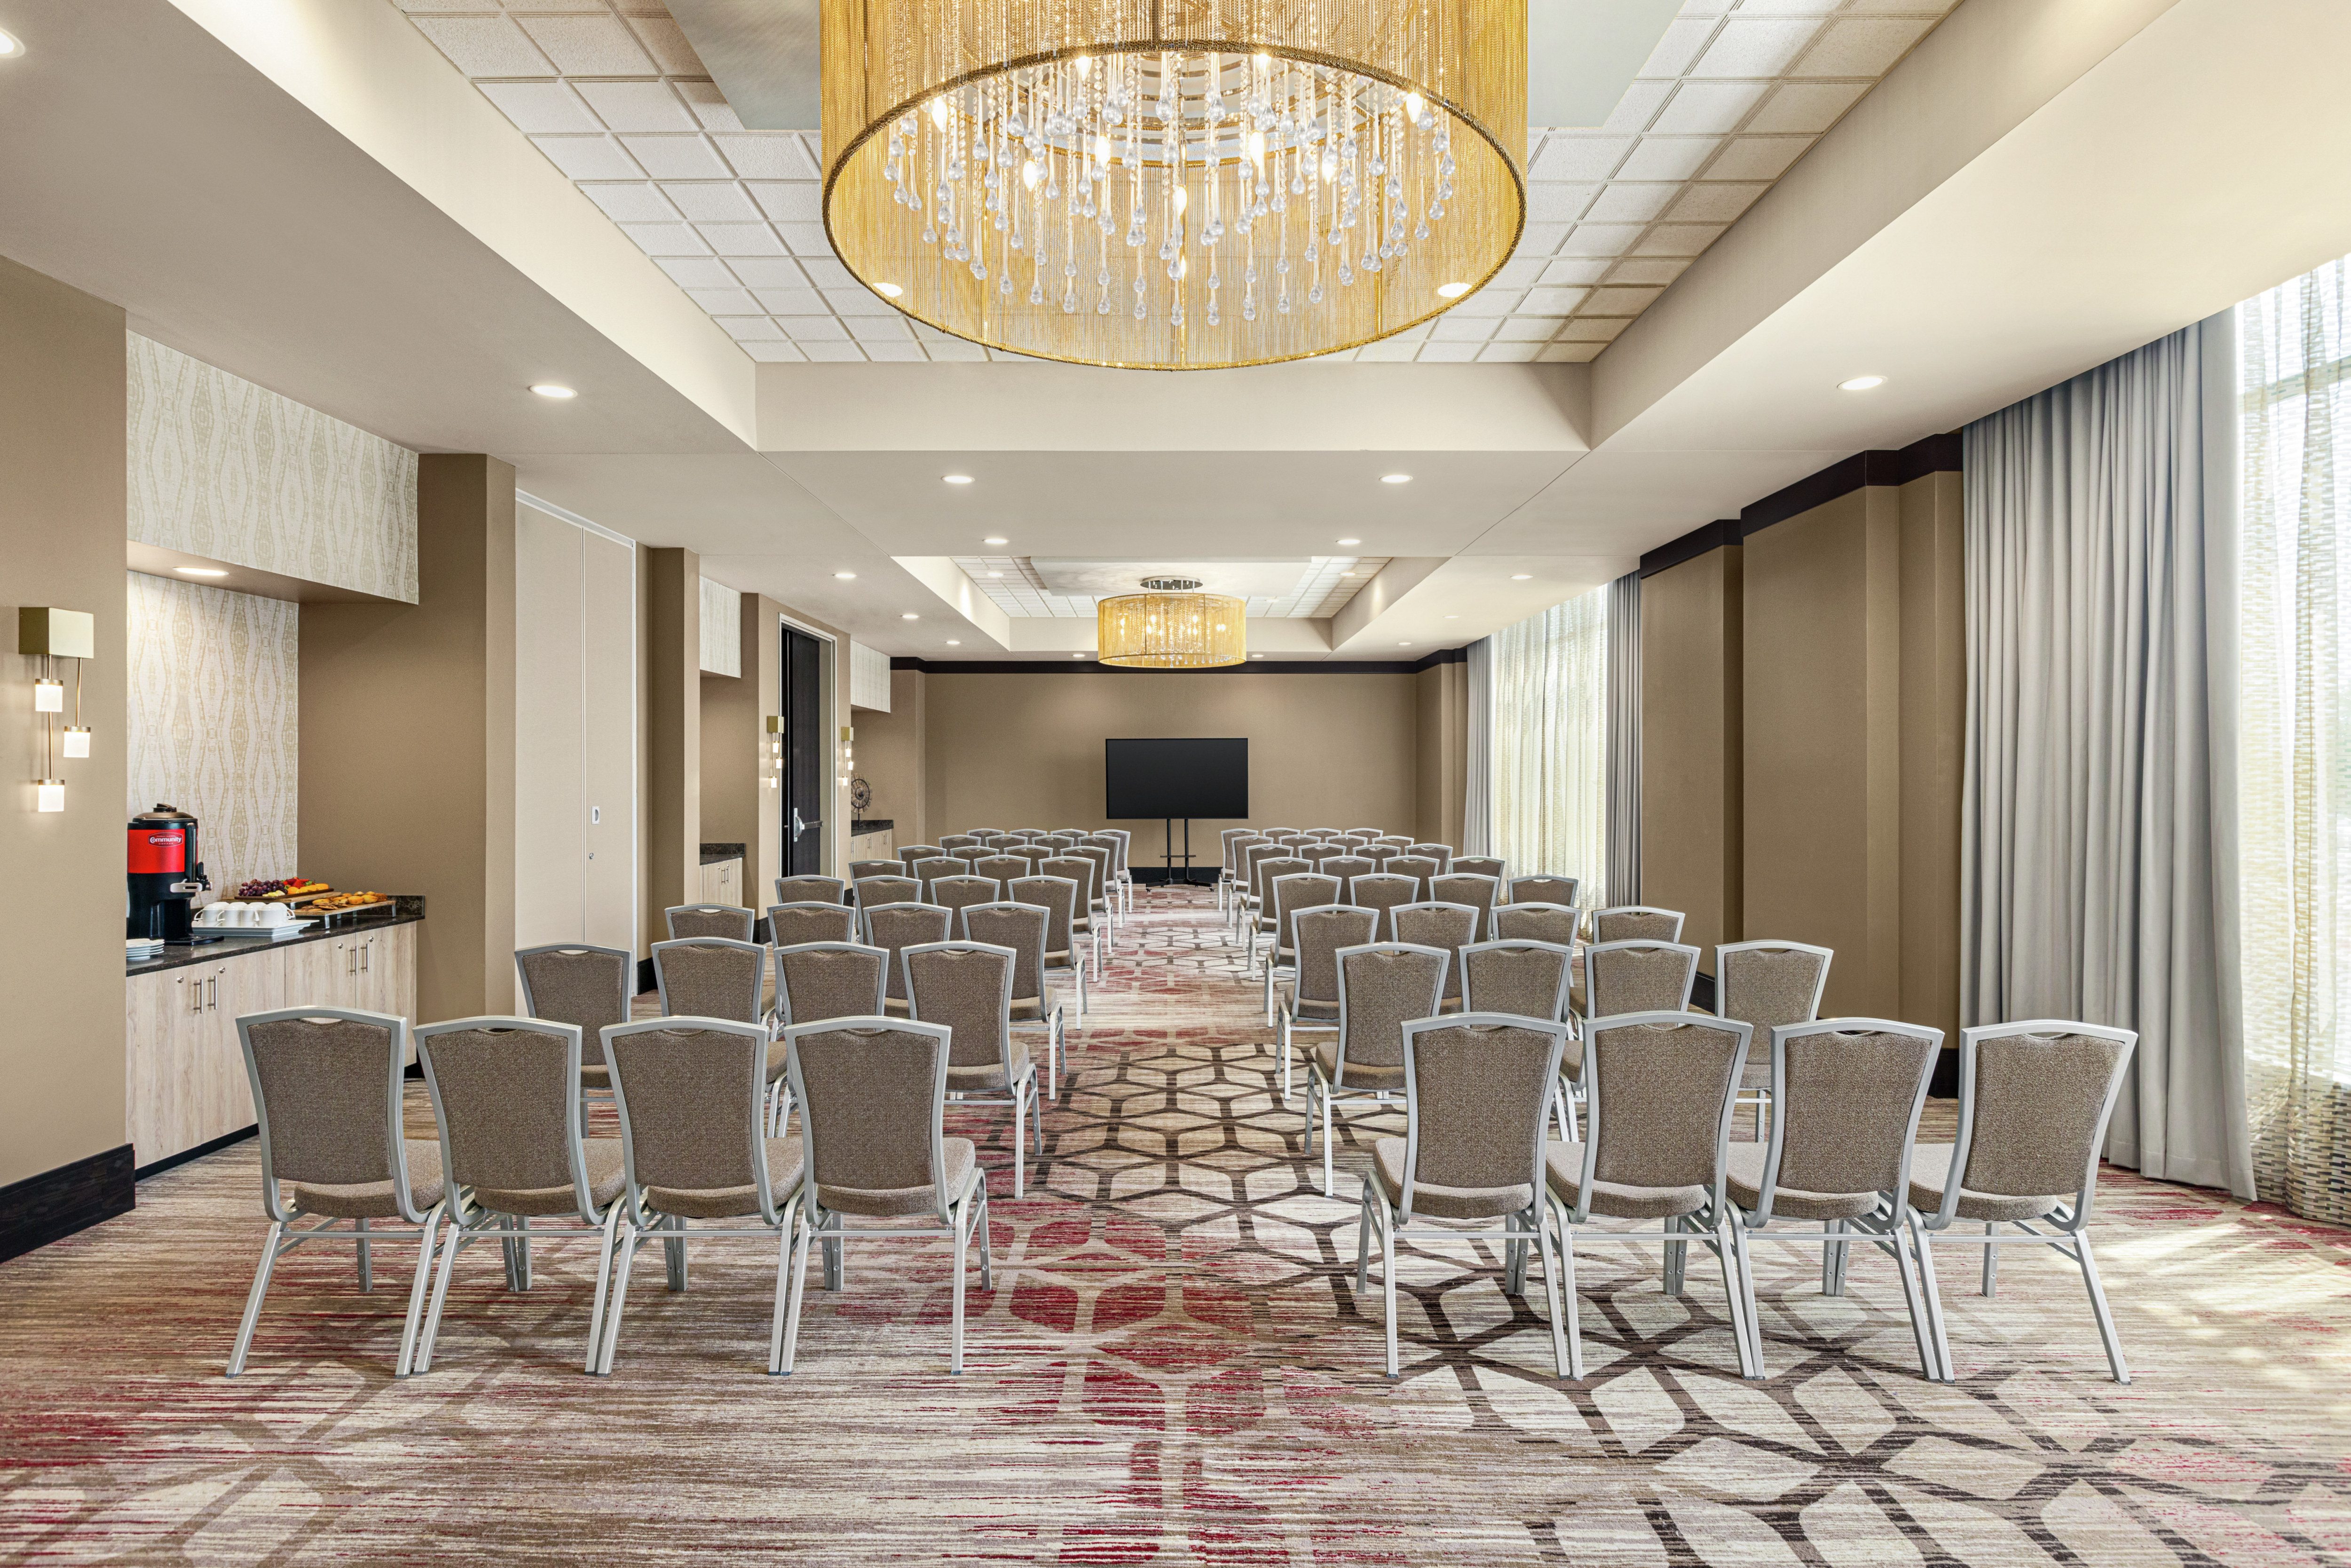 Spacious meeting room featuring a theater style setup, refreshment station, and TV at front of room.